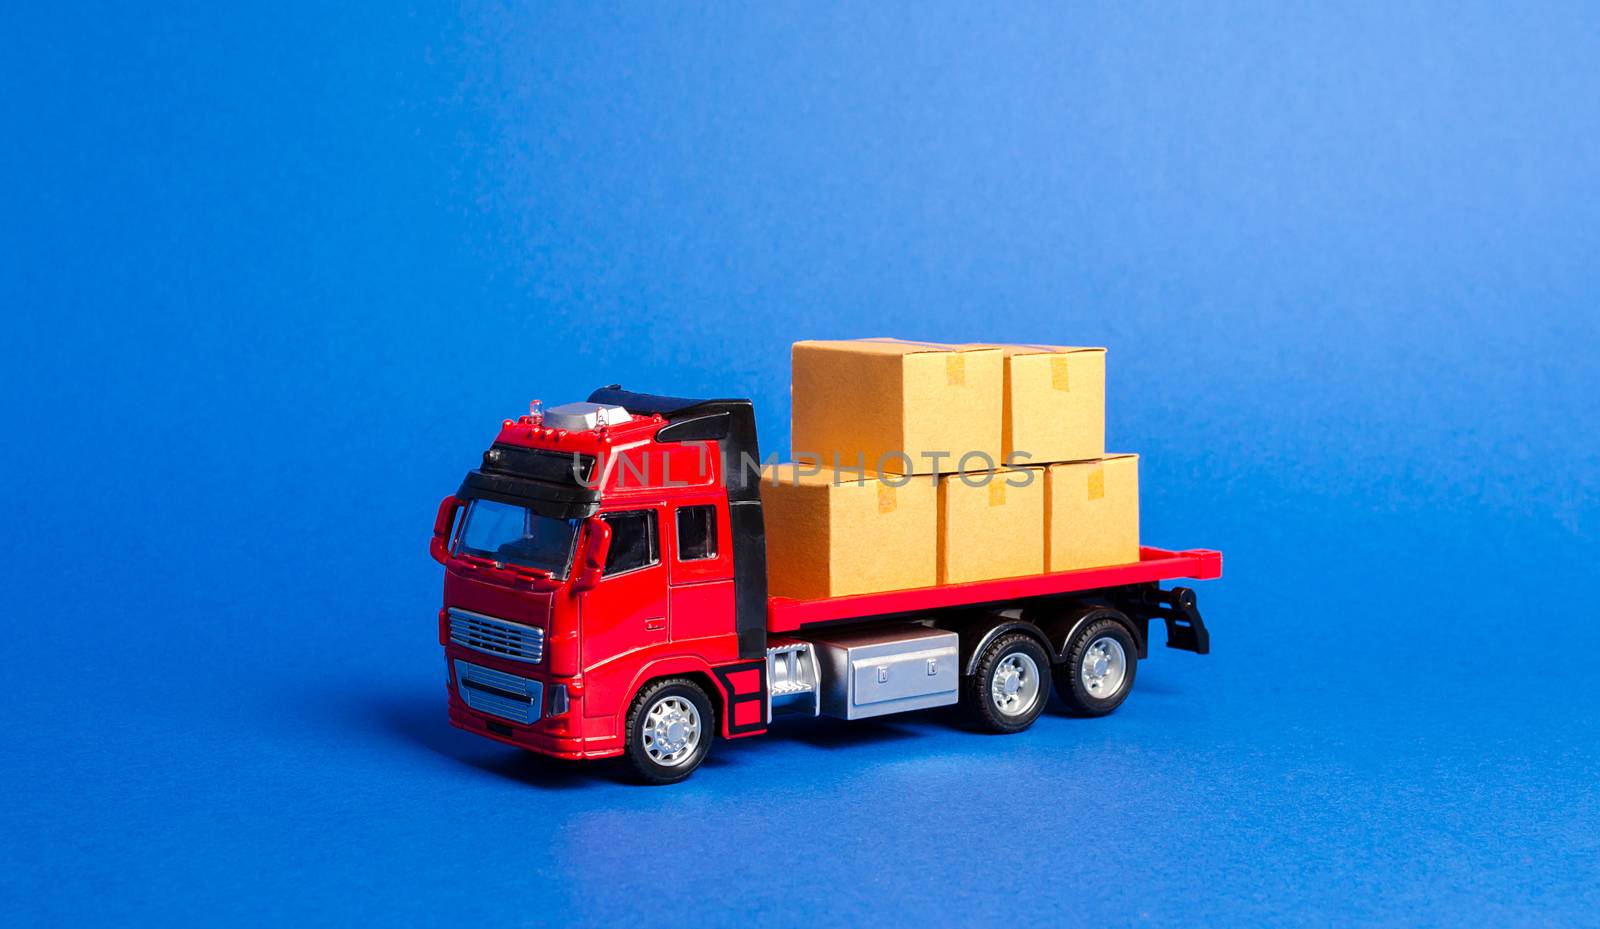 A red truck loaded with boxes. Transportation company. Services transportation of goods and products, logistics and infrastructure. Warehousing and supply. Optimization of delivery logistics.